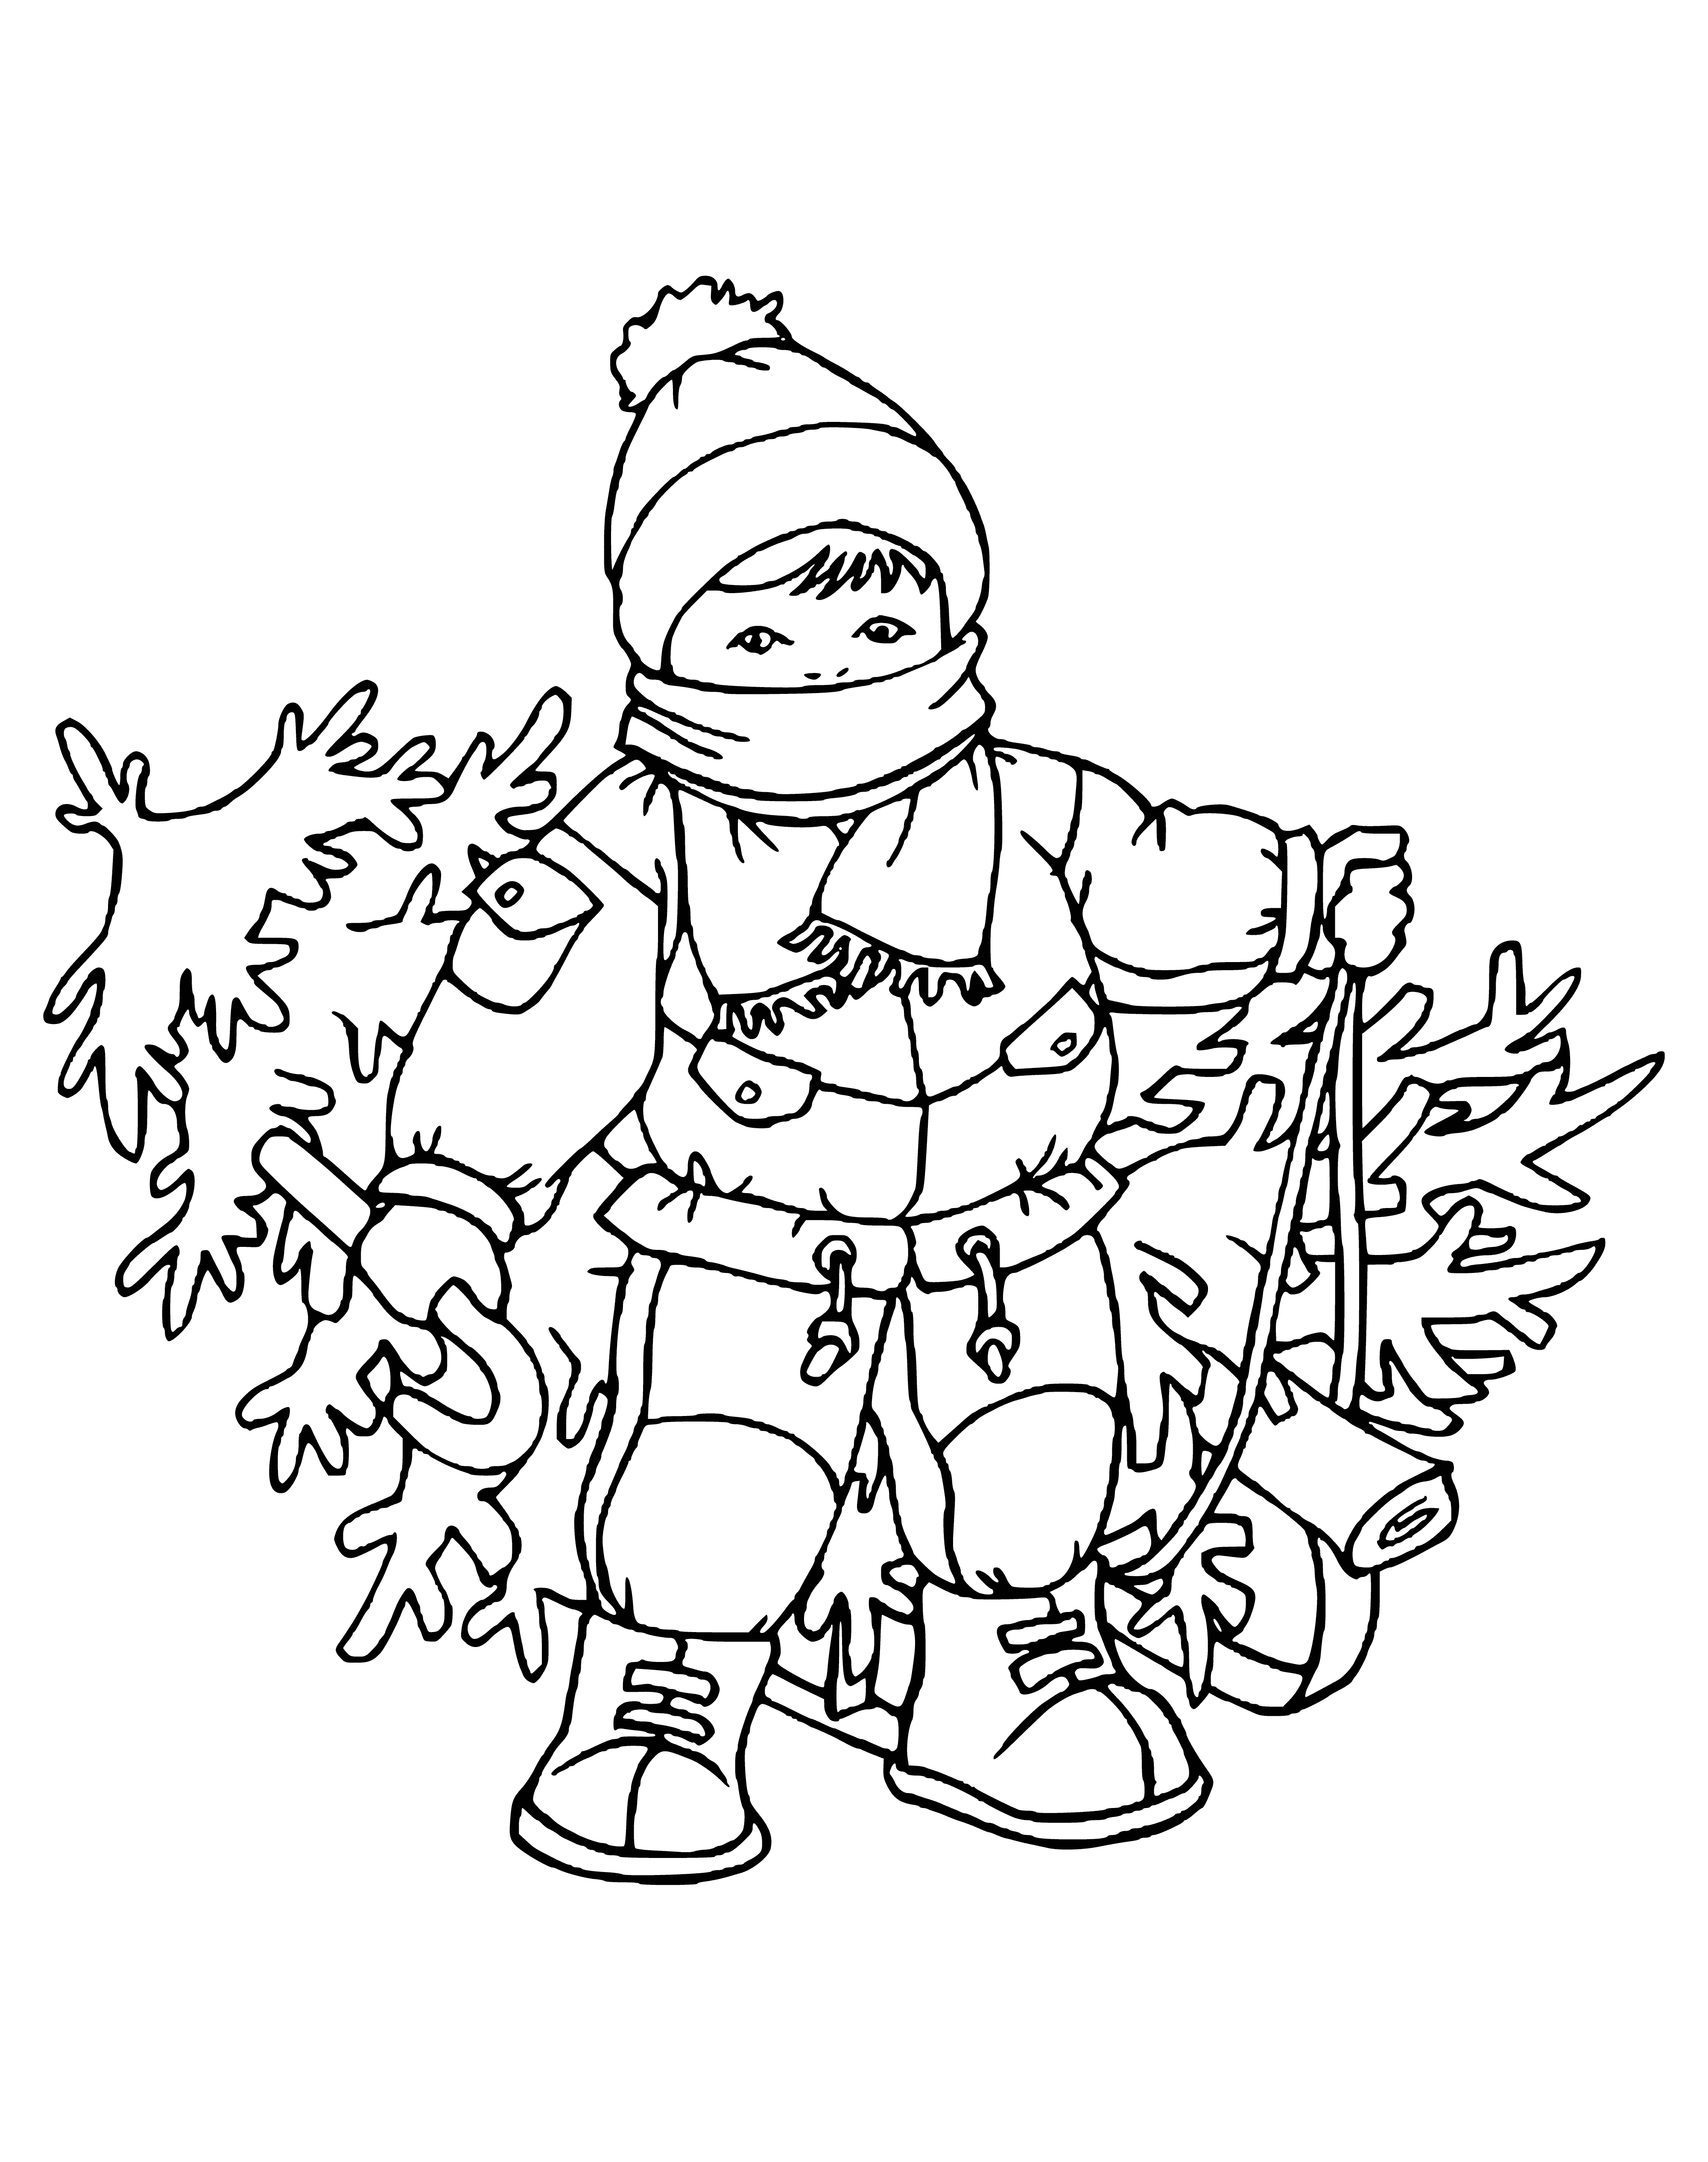 coloring page: Boy smiles, decorates Christmas tree with lights & ornaments.